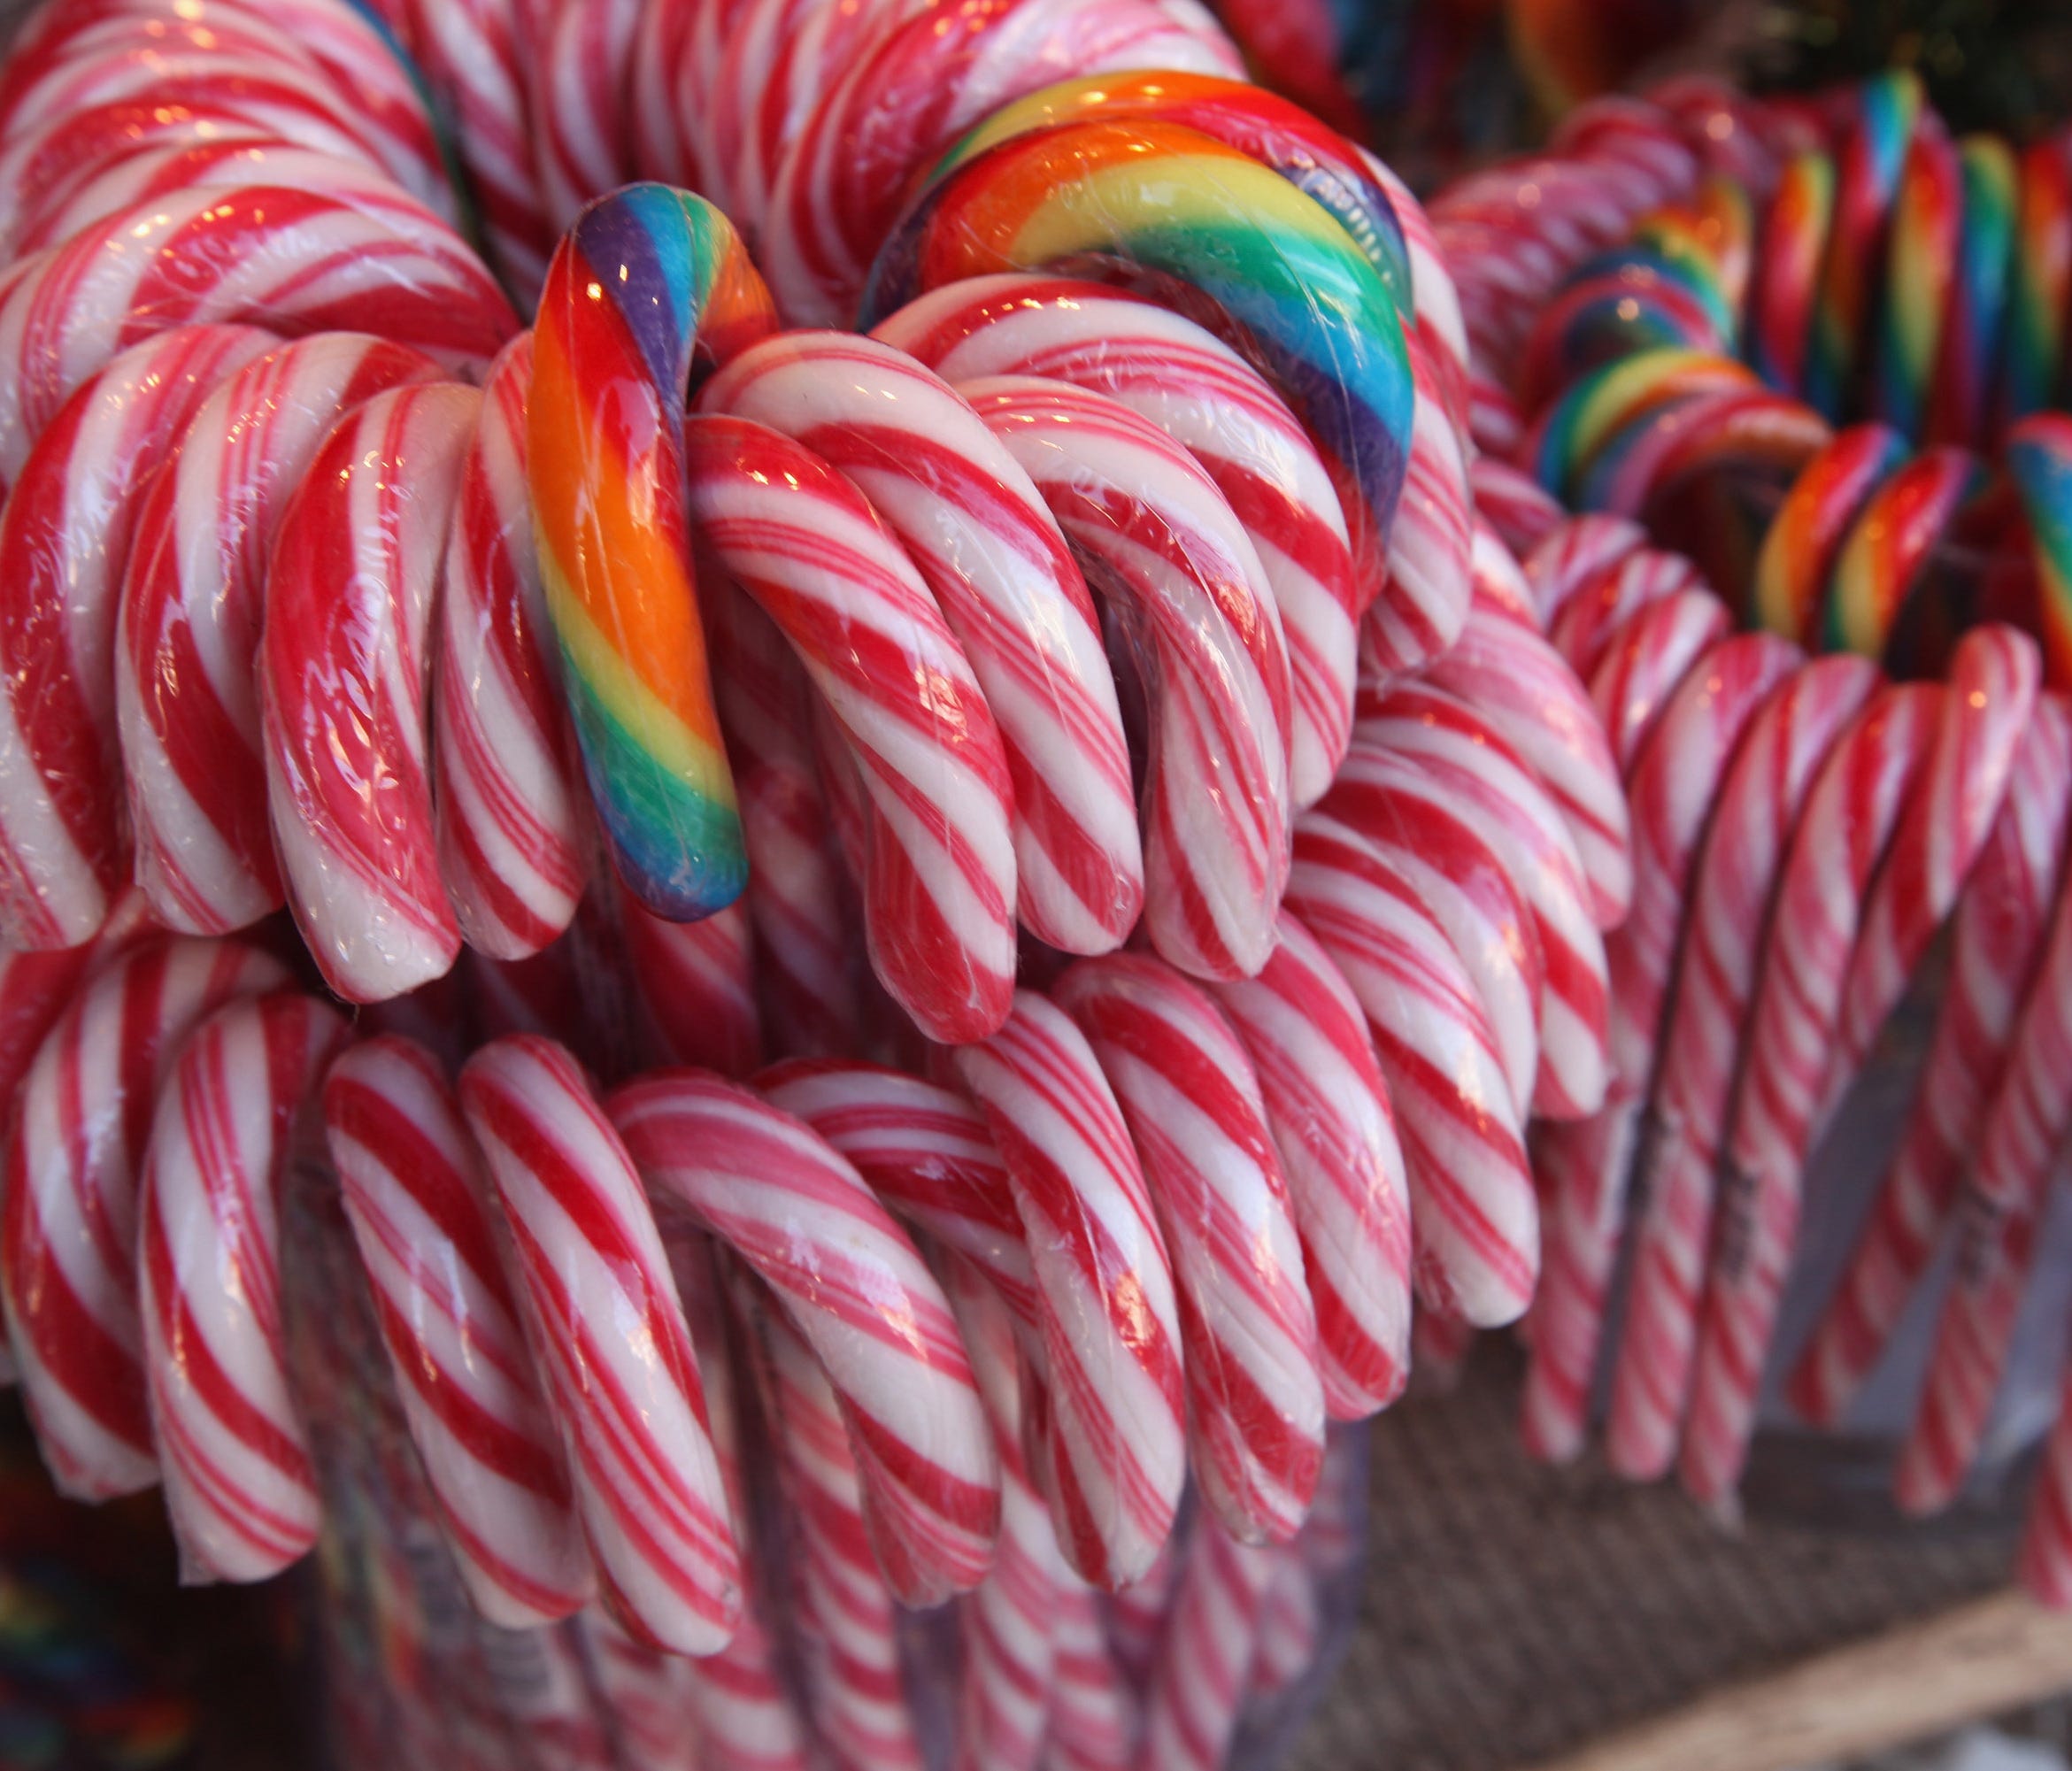 Tuesday is National Candy Cane Day.